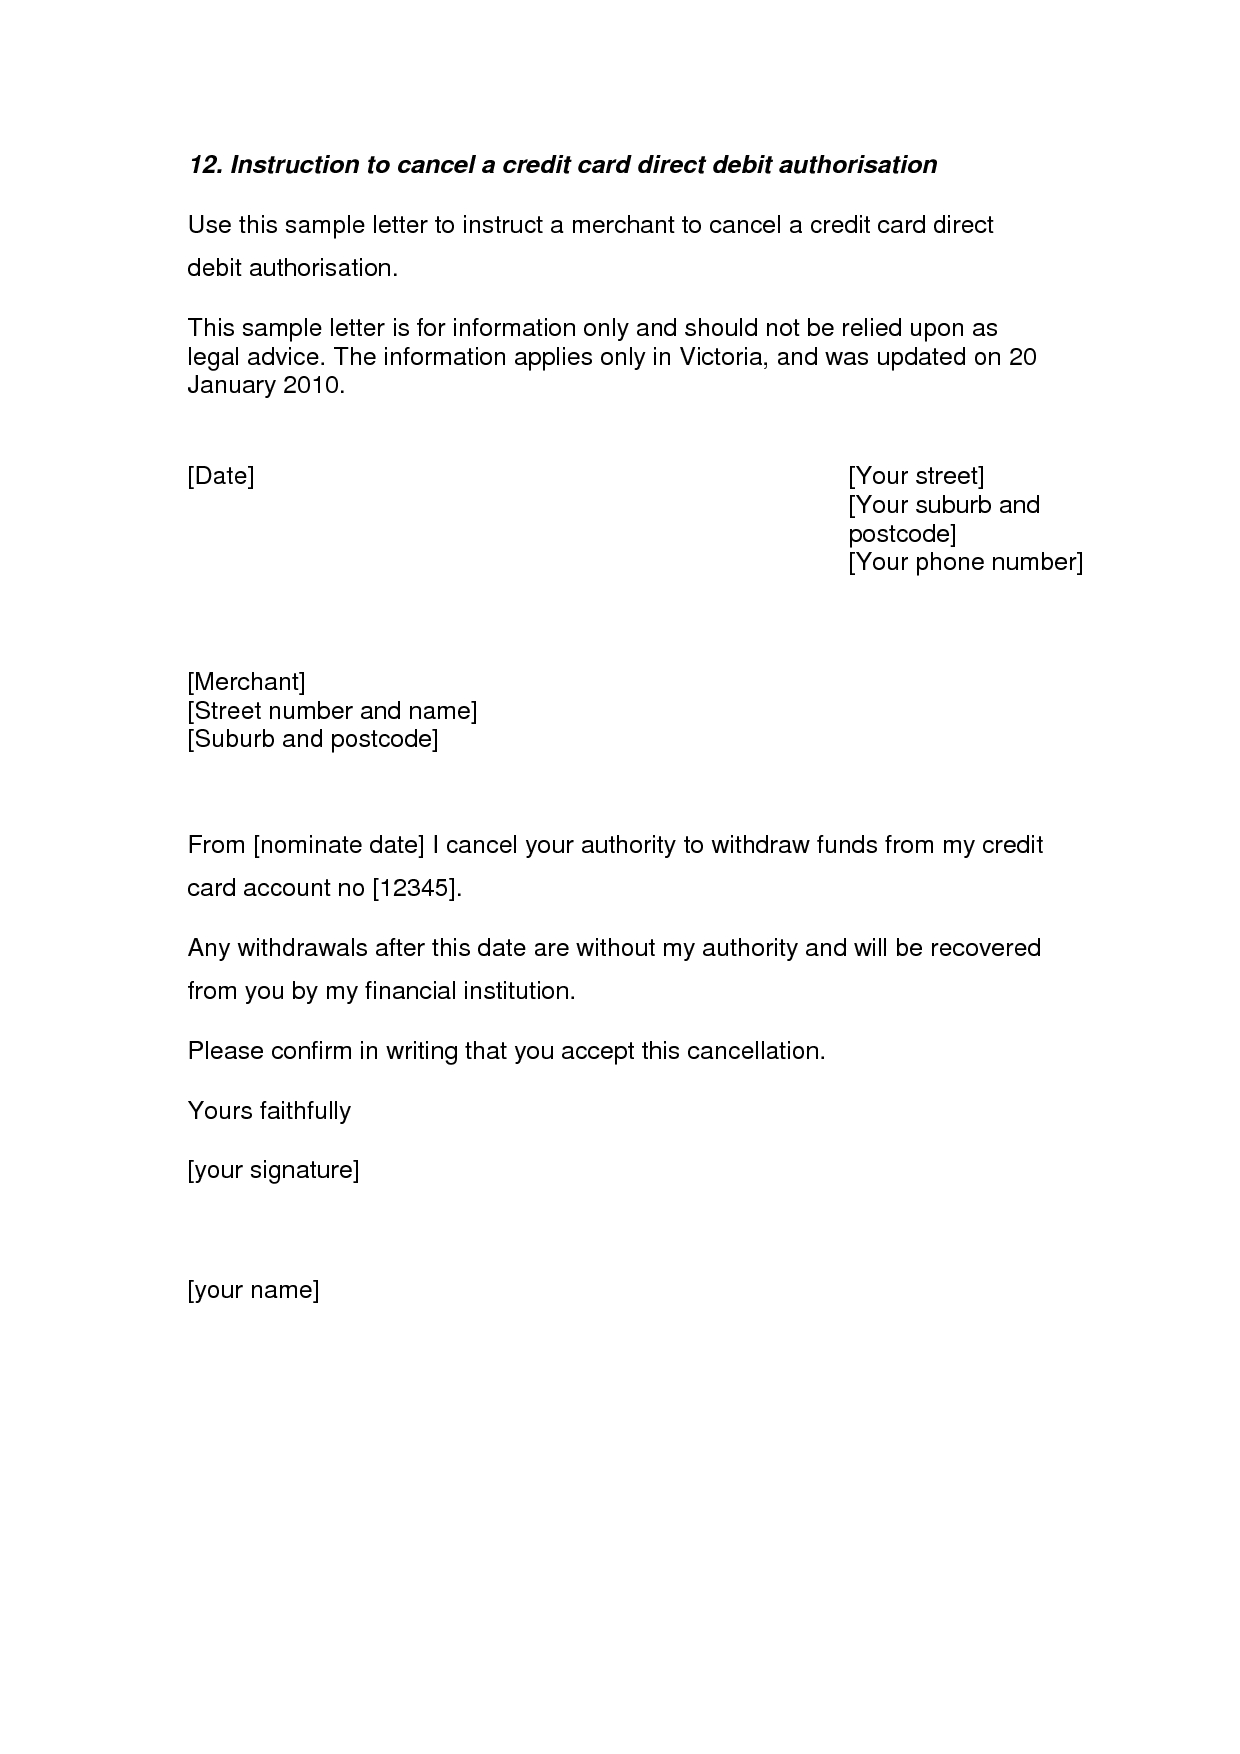 Termination Letter Template Free - Credit Card Cancellation Letter A Credit Card Cancellation Letter